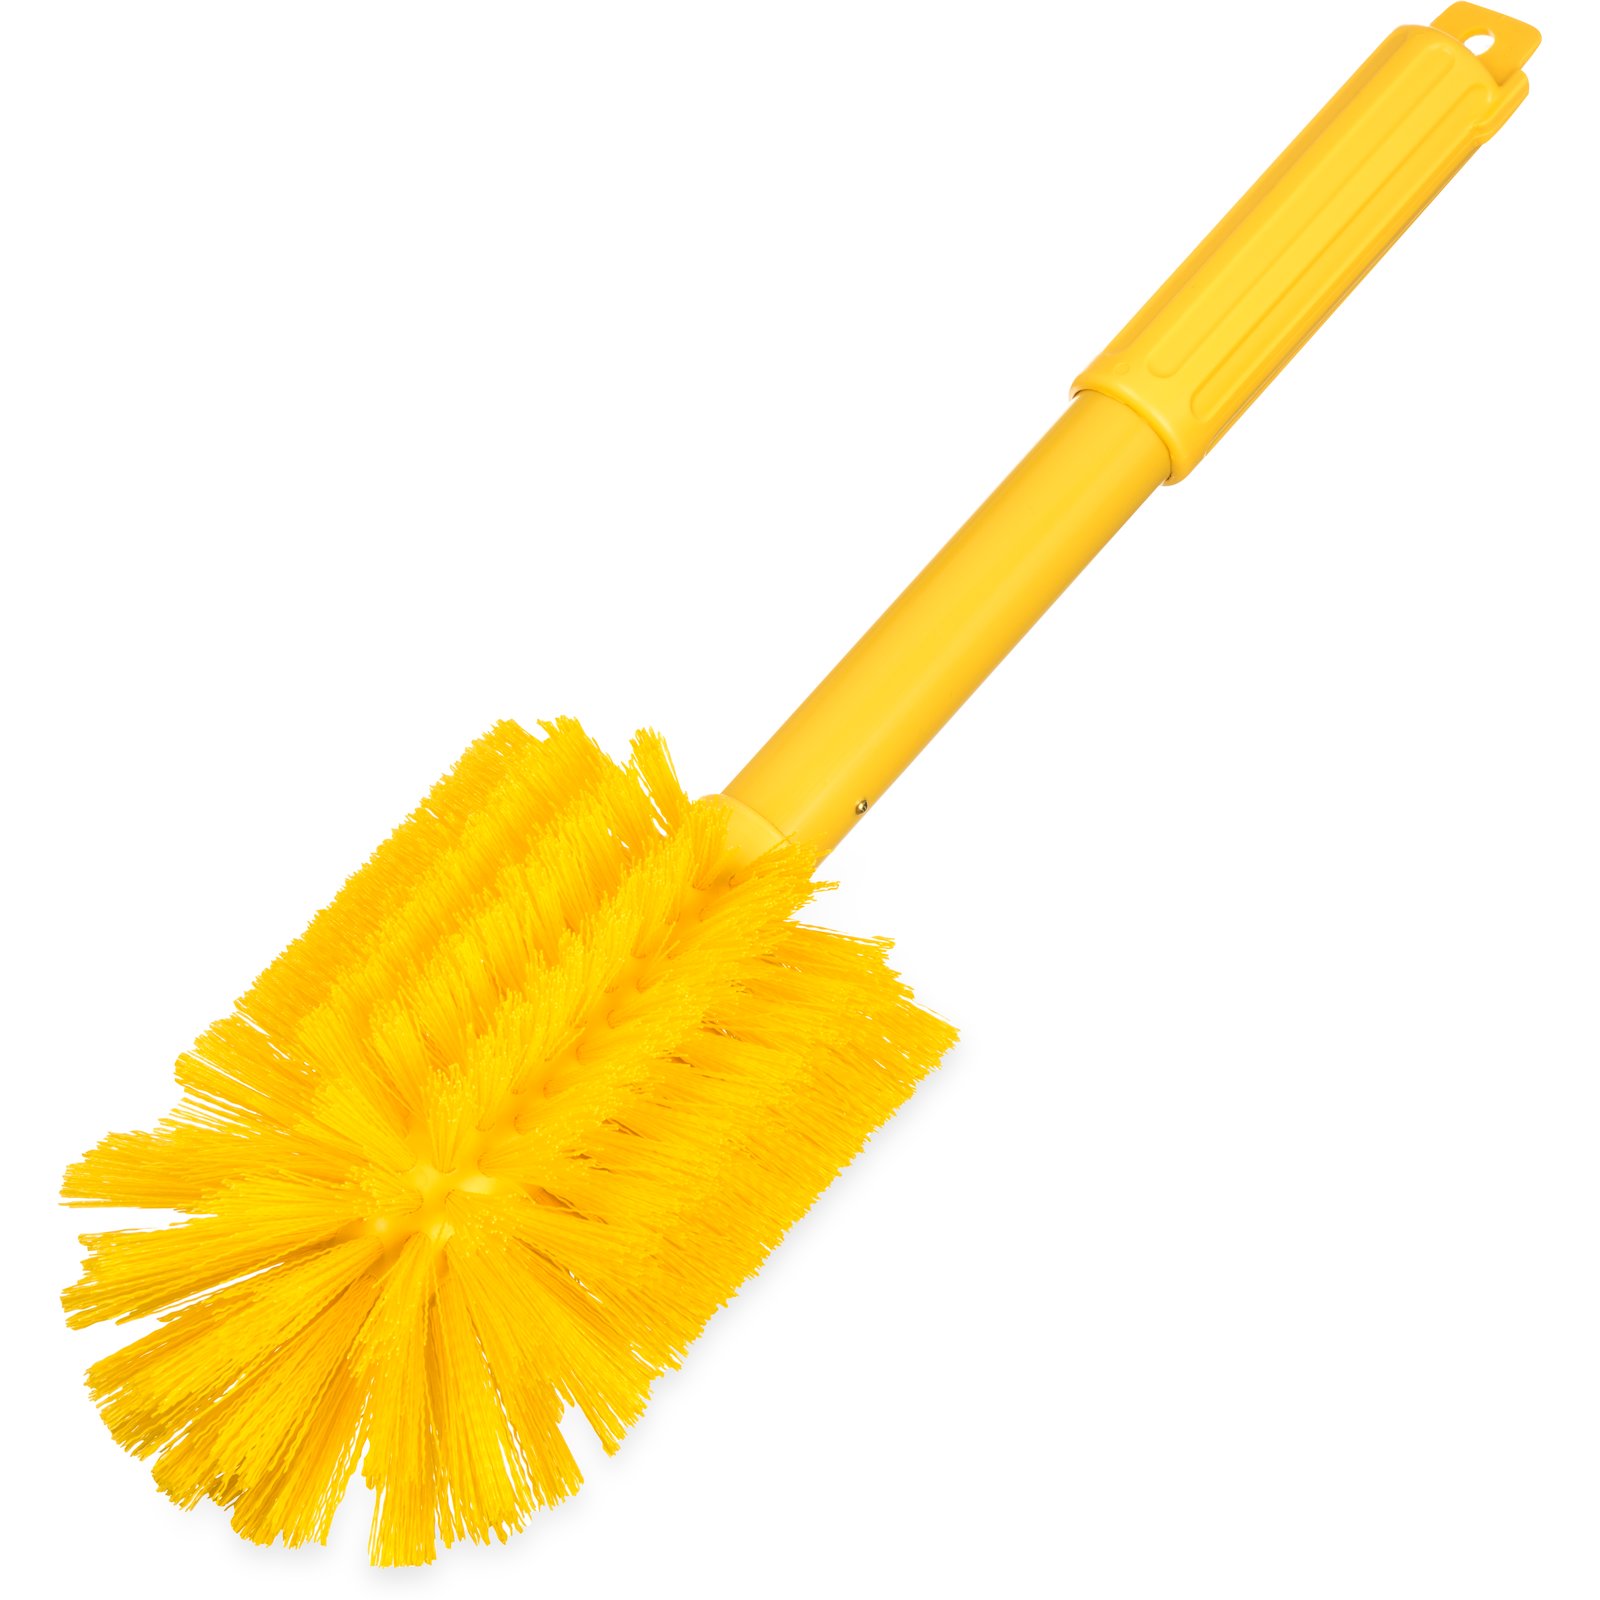 50PCS Disposable Crevice Cleaning Brush Tool kit, Disposable Toilet Brush,  Disposable Toilet seat Cleaner Tool (Yellow) 